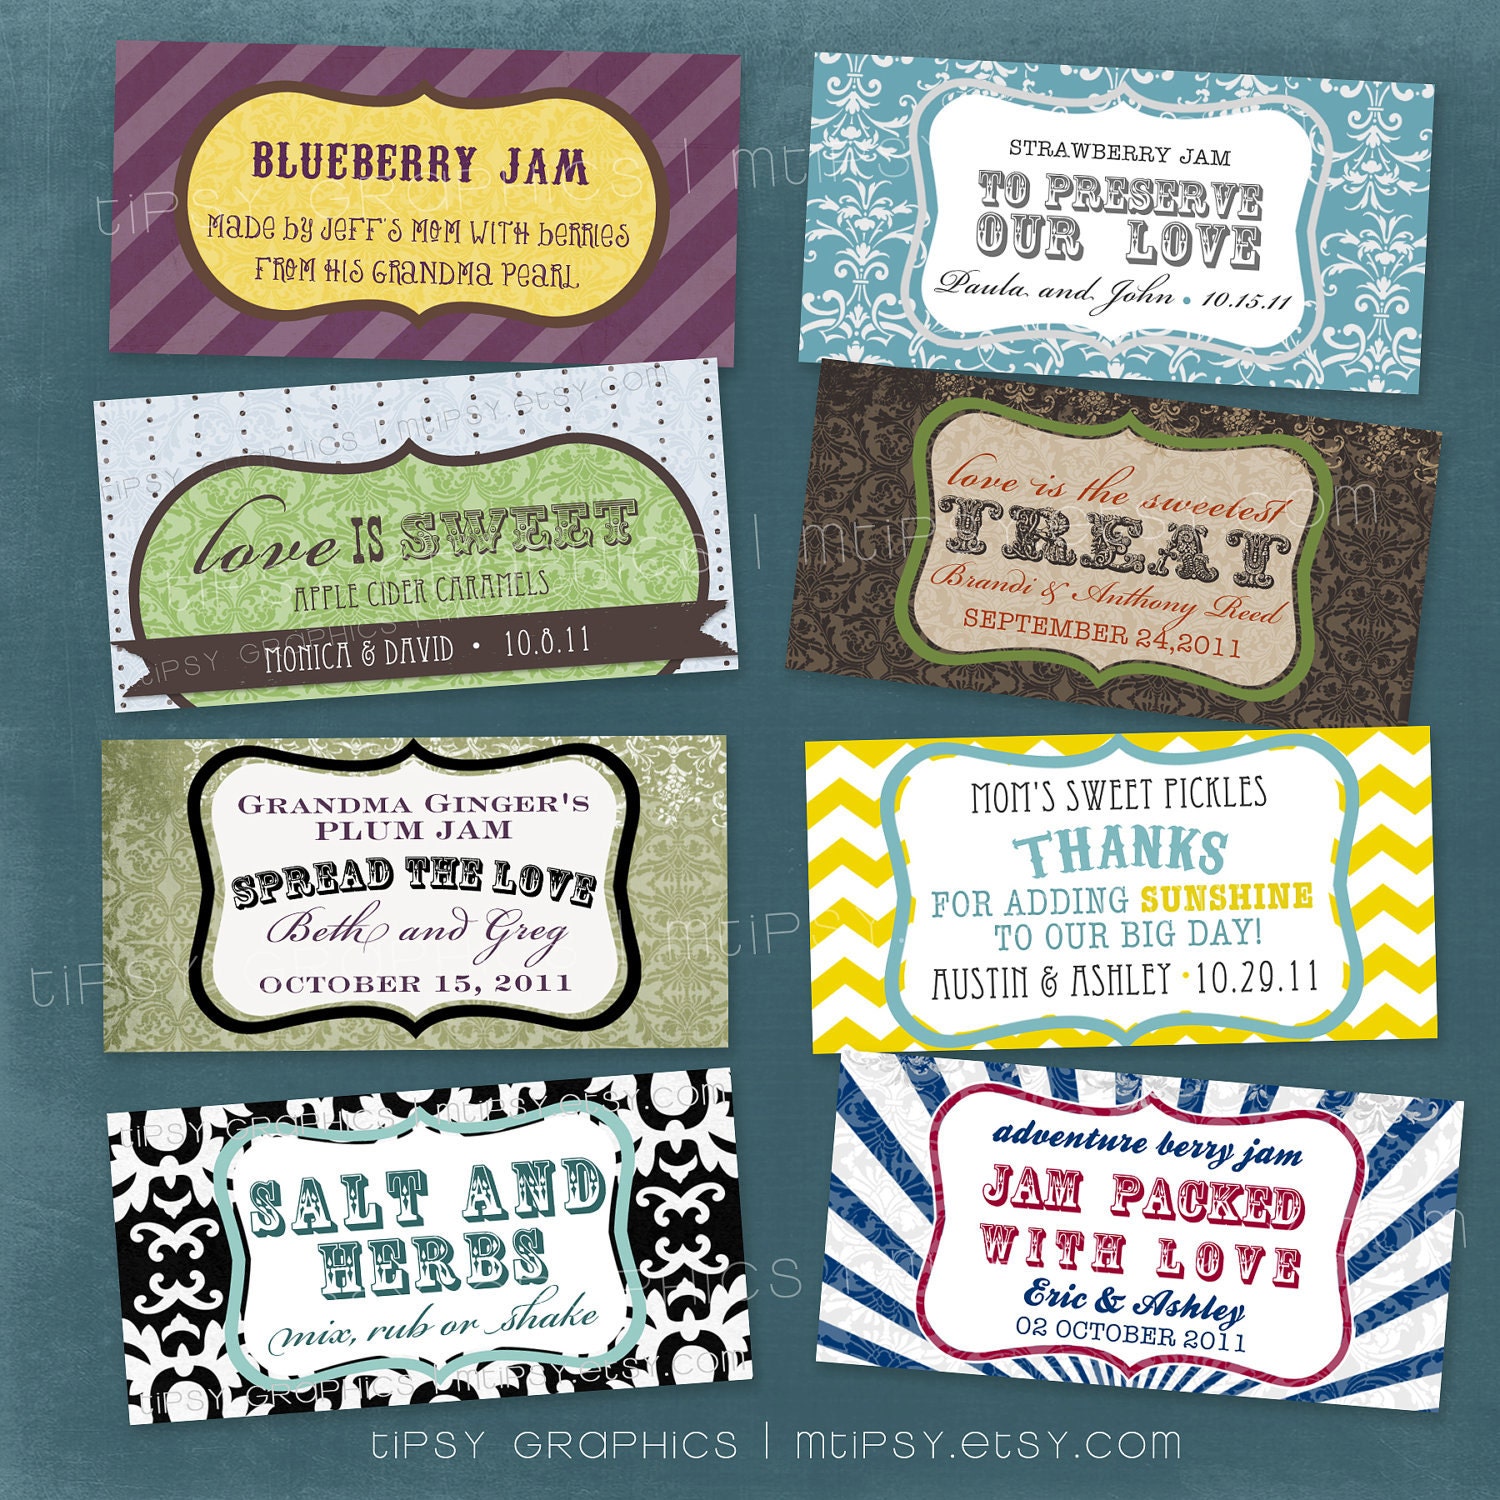 Spread the Love. Jam Packed with Love. Jam Label Design Printable file. Made to Match your Weddings by Tipsy Graphics